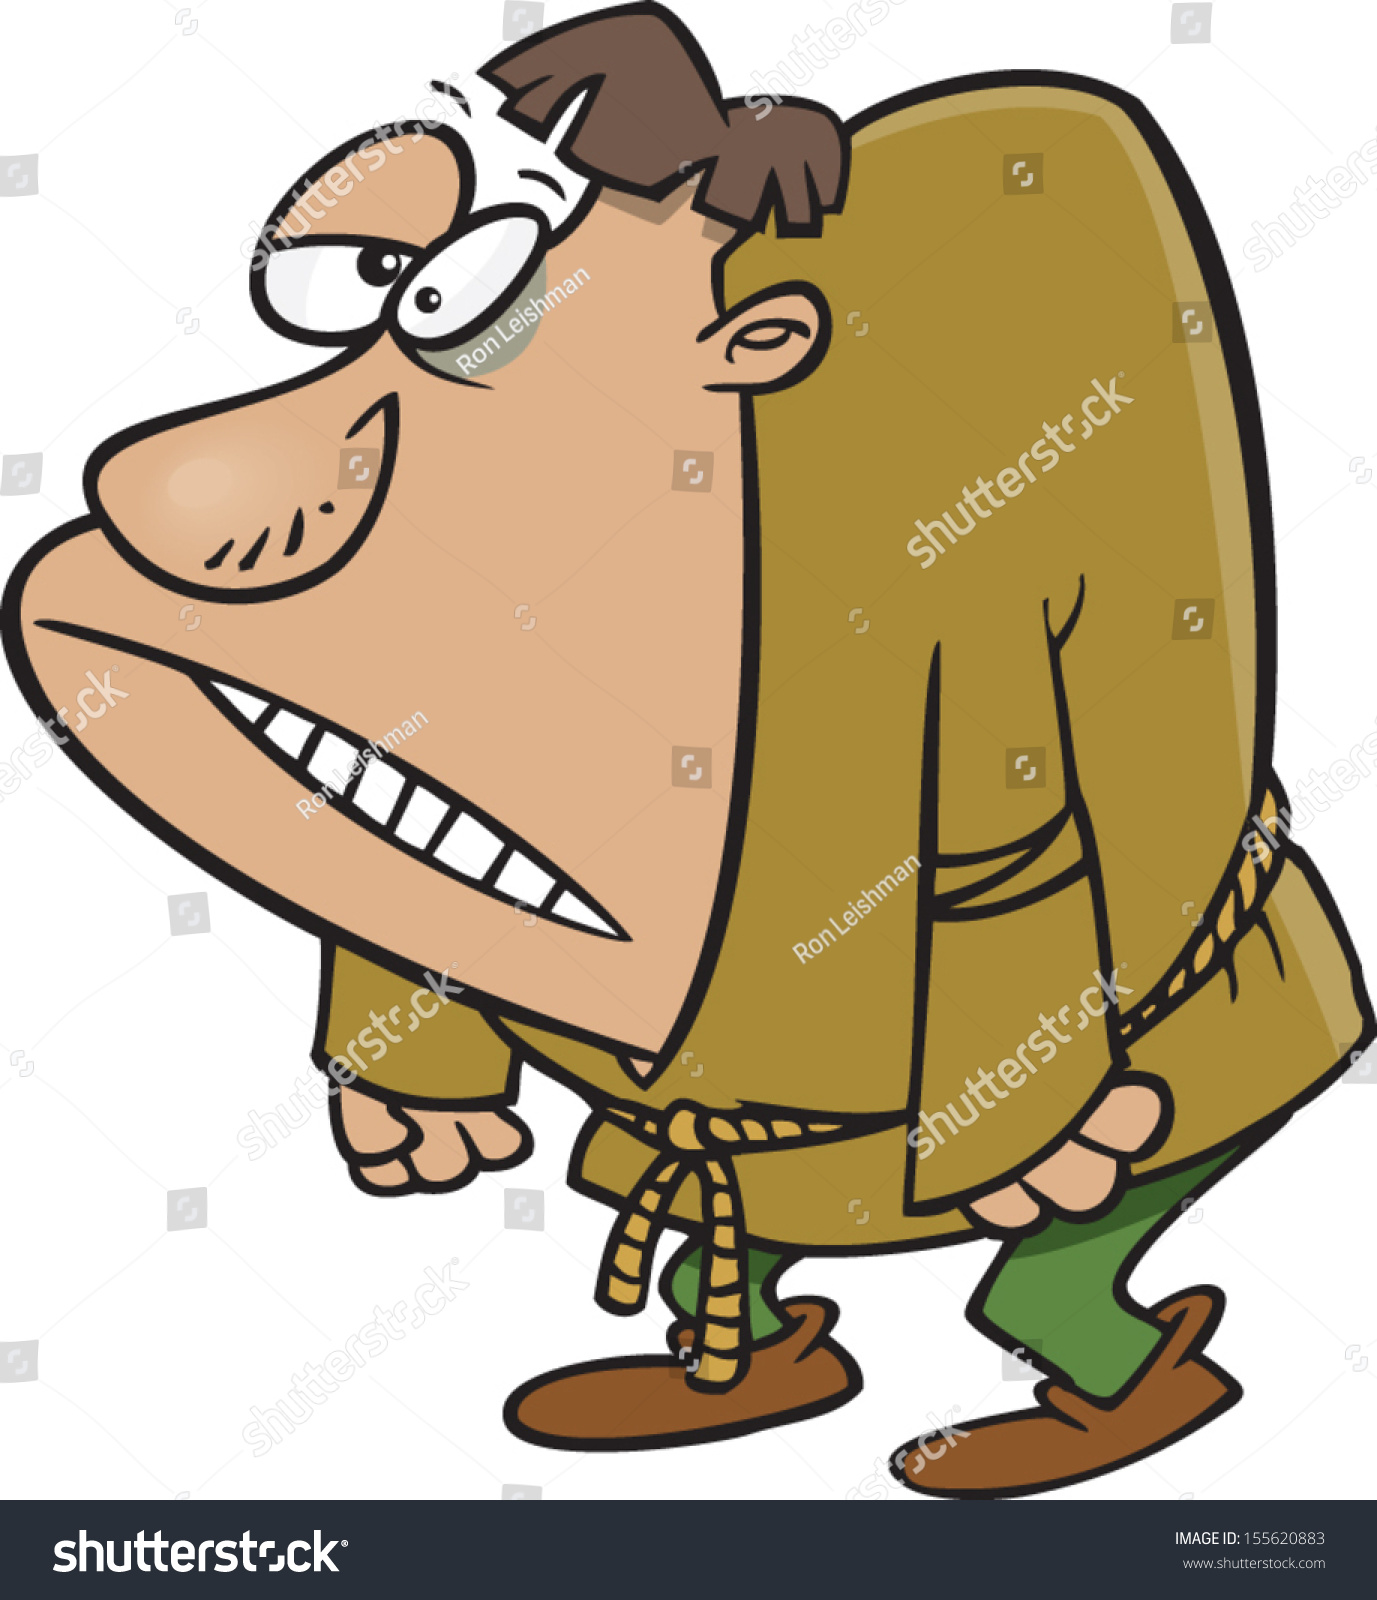 Hunchback clipart 5 » Clipart Station.